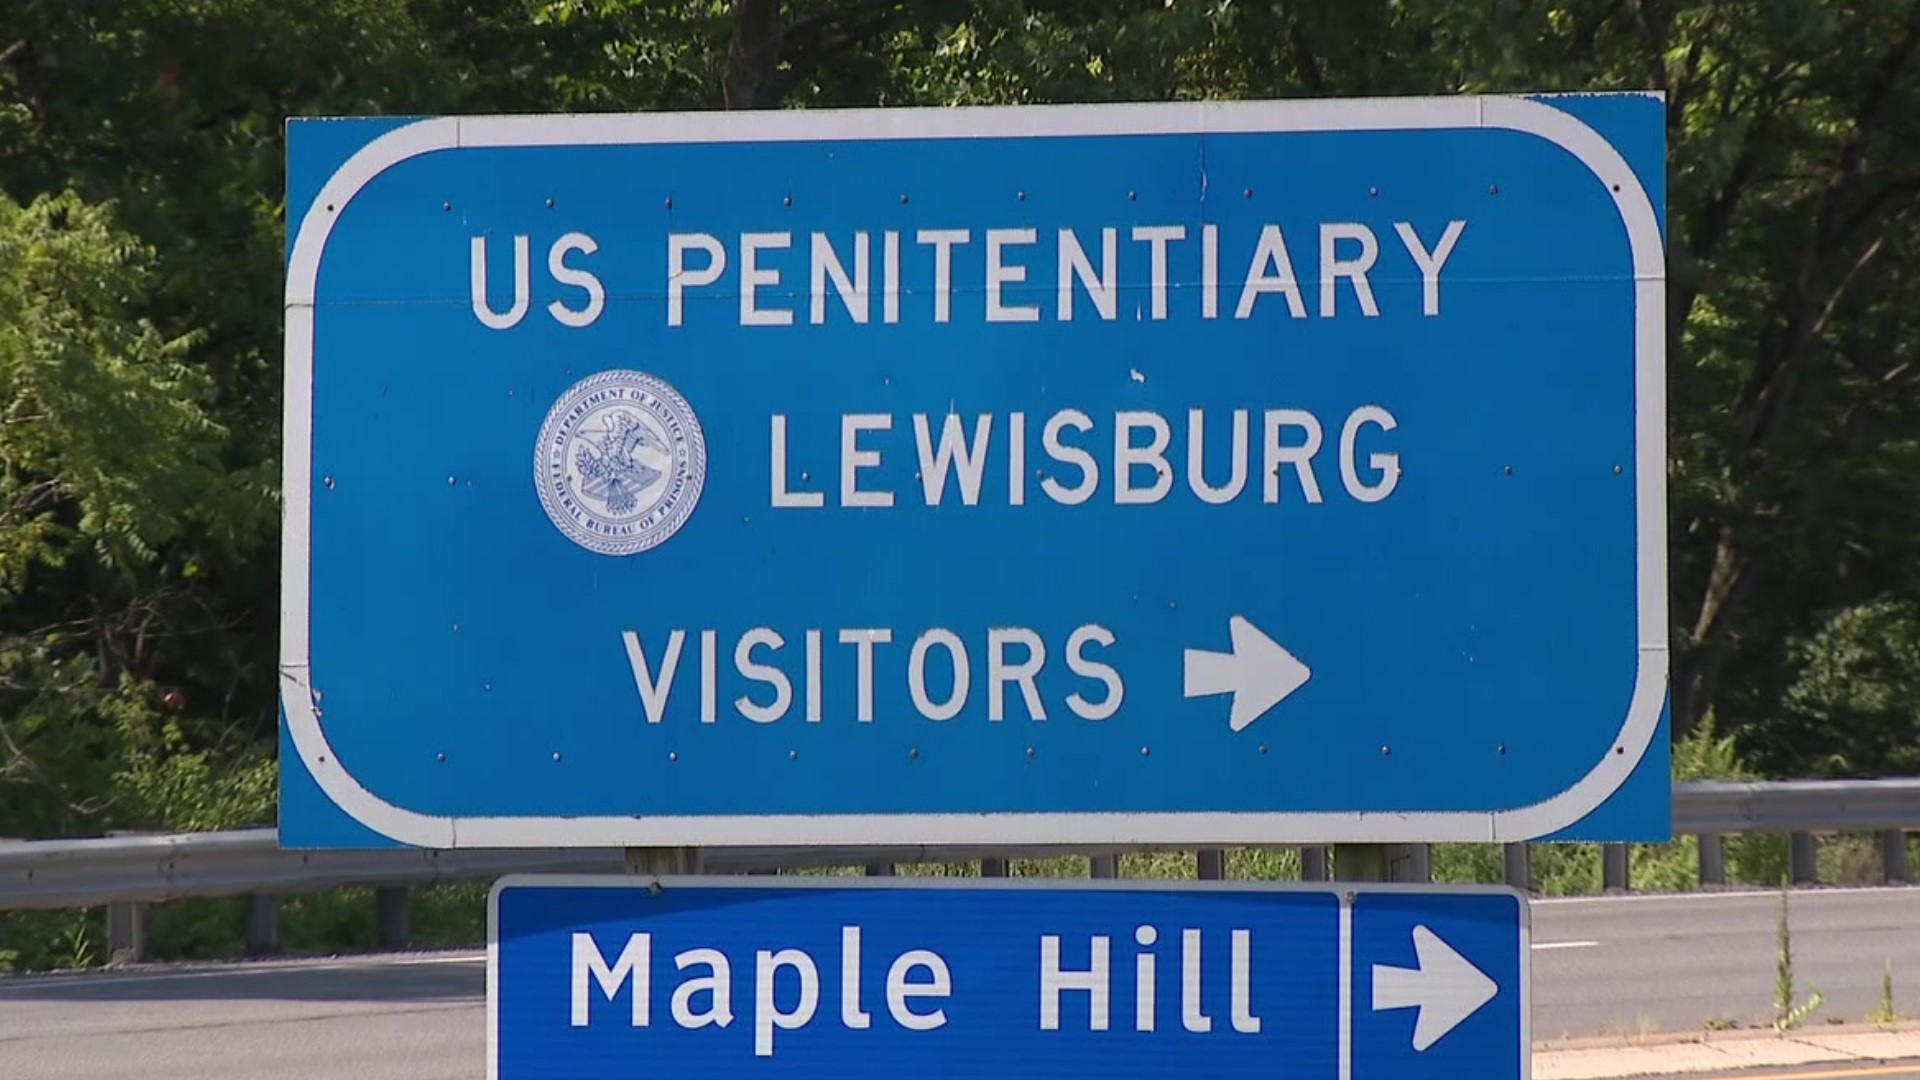 Most of the increase is attributed to the federal prison facility in Lewisburg.